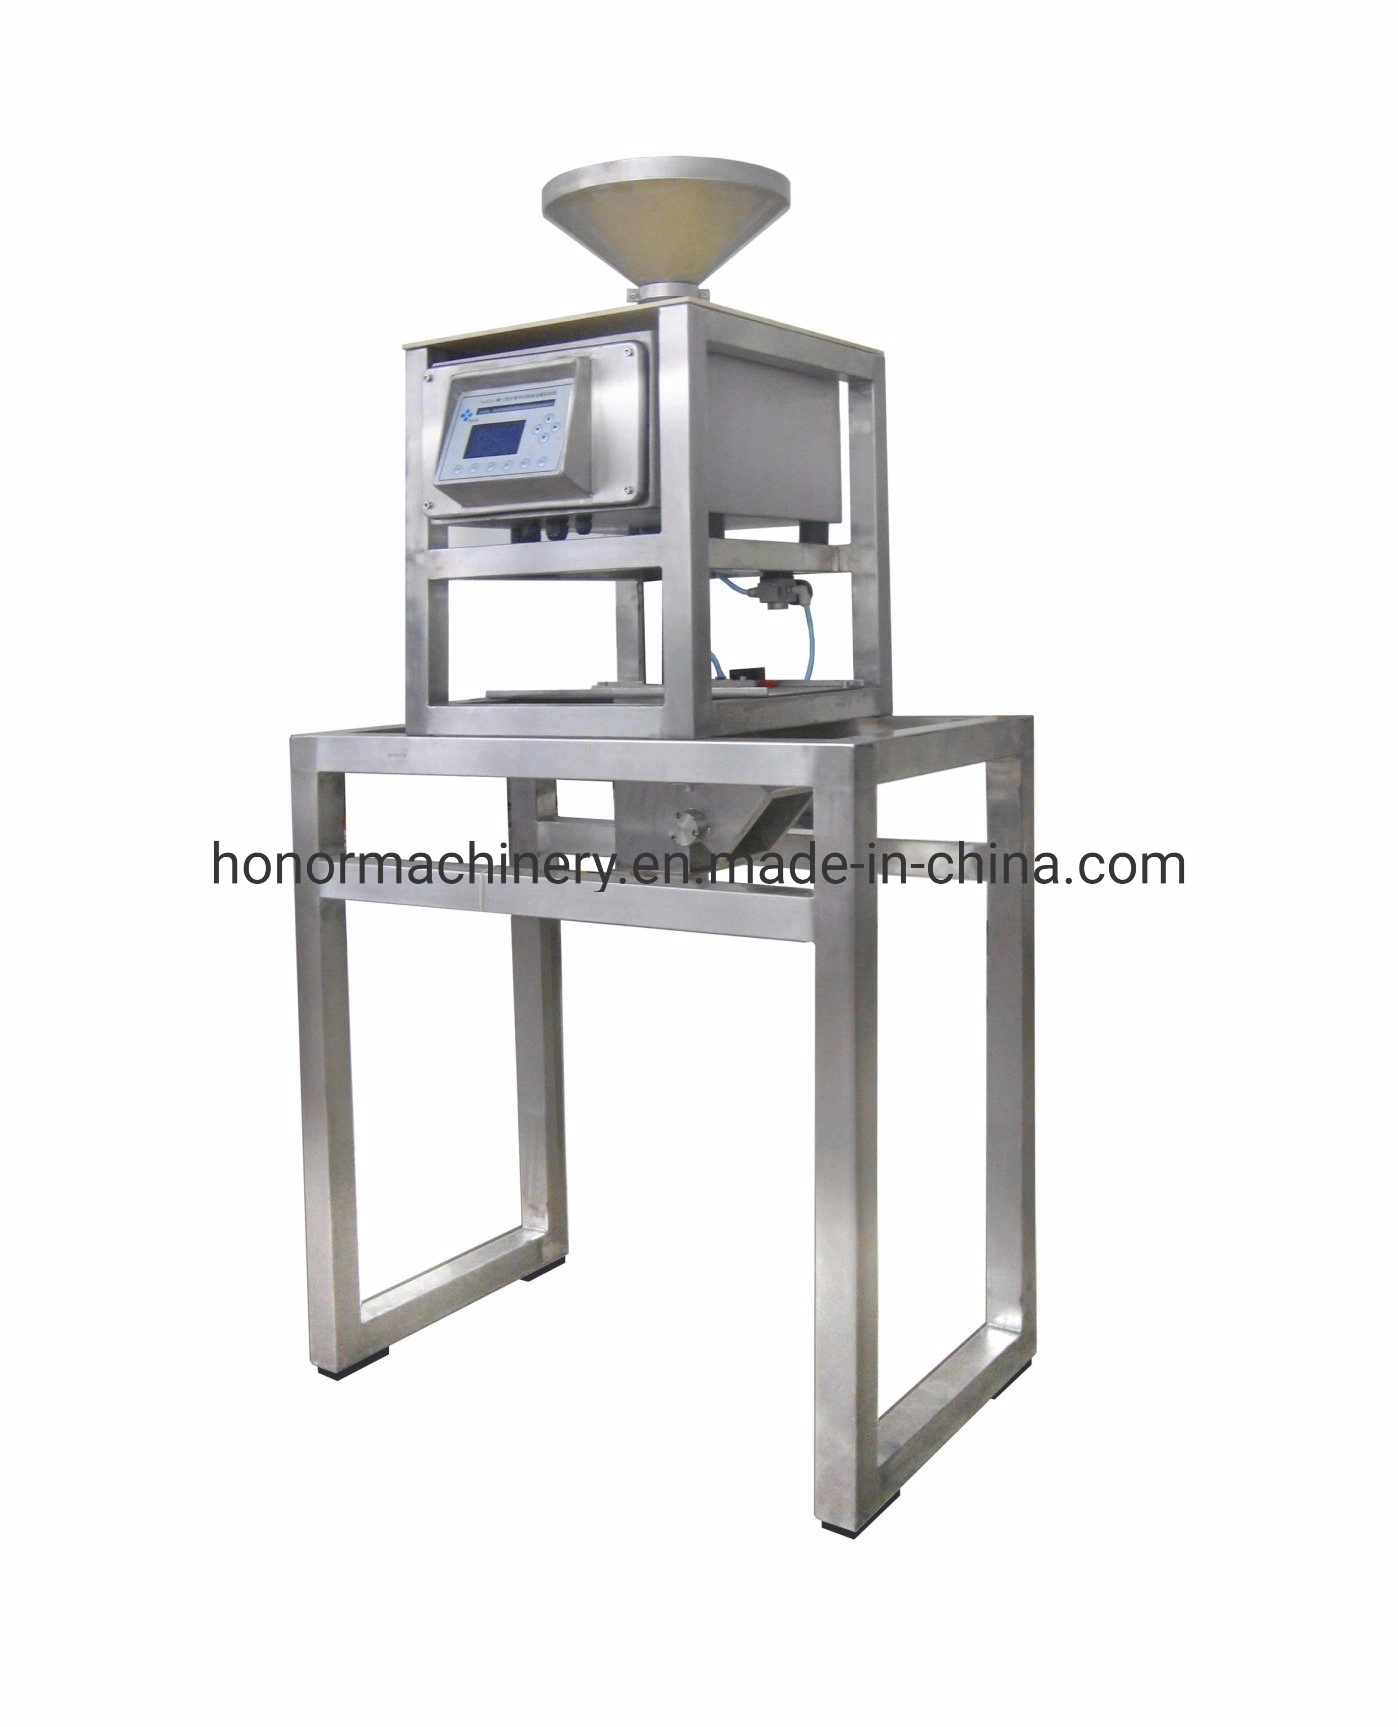 High Precision Gravity Fall Metal Detector for The Powder of Chemical Industry